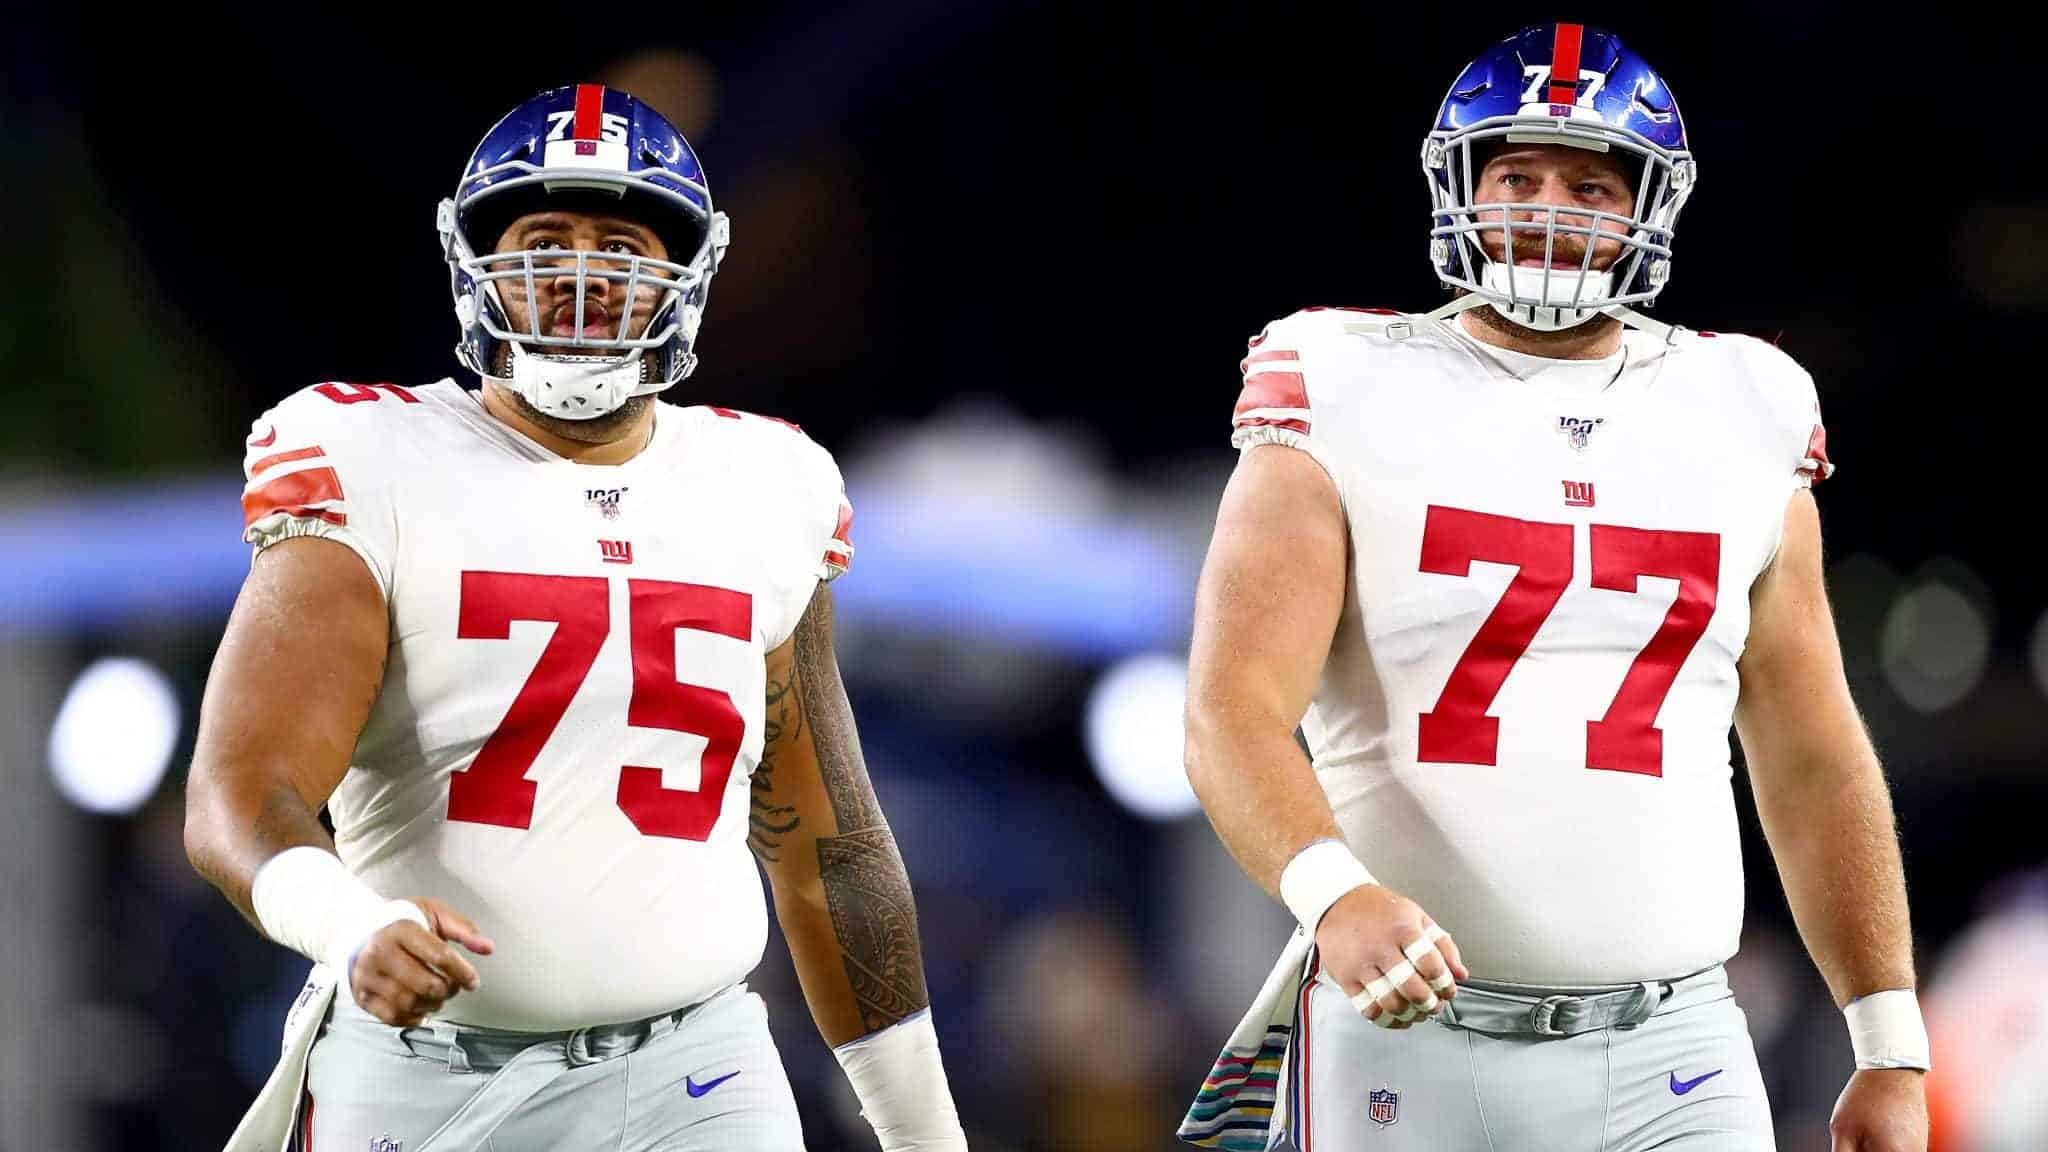 FOXBOROUGH, MASSACHUSETTS - OCTOBER 10: Jon Halapio #75 and Spencer Pulley #77 of the New York Giants look on prior to the game against the New England Patriots at Gillette Stadium on October 10, 2019 in Foxborough, Massachusetts.